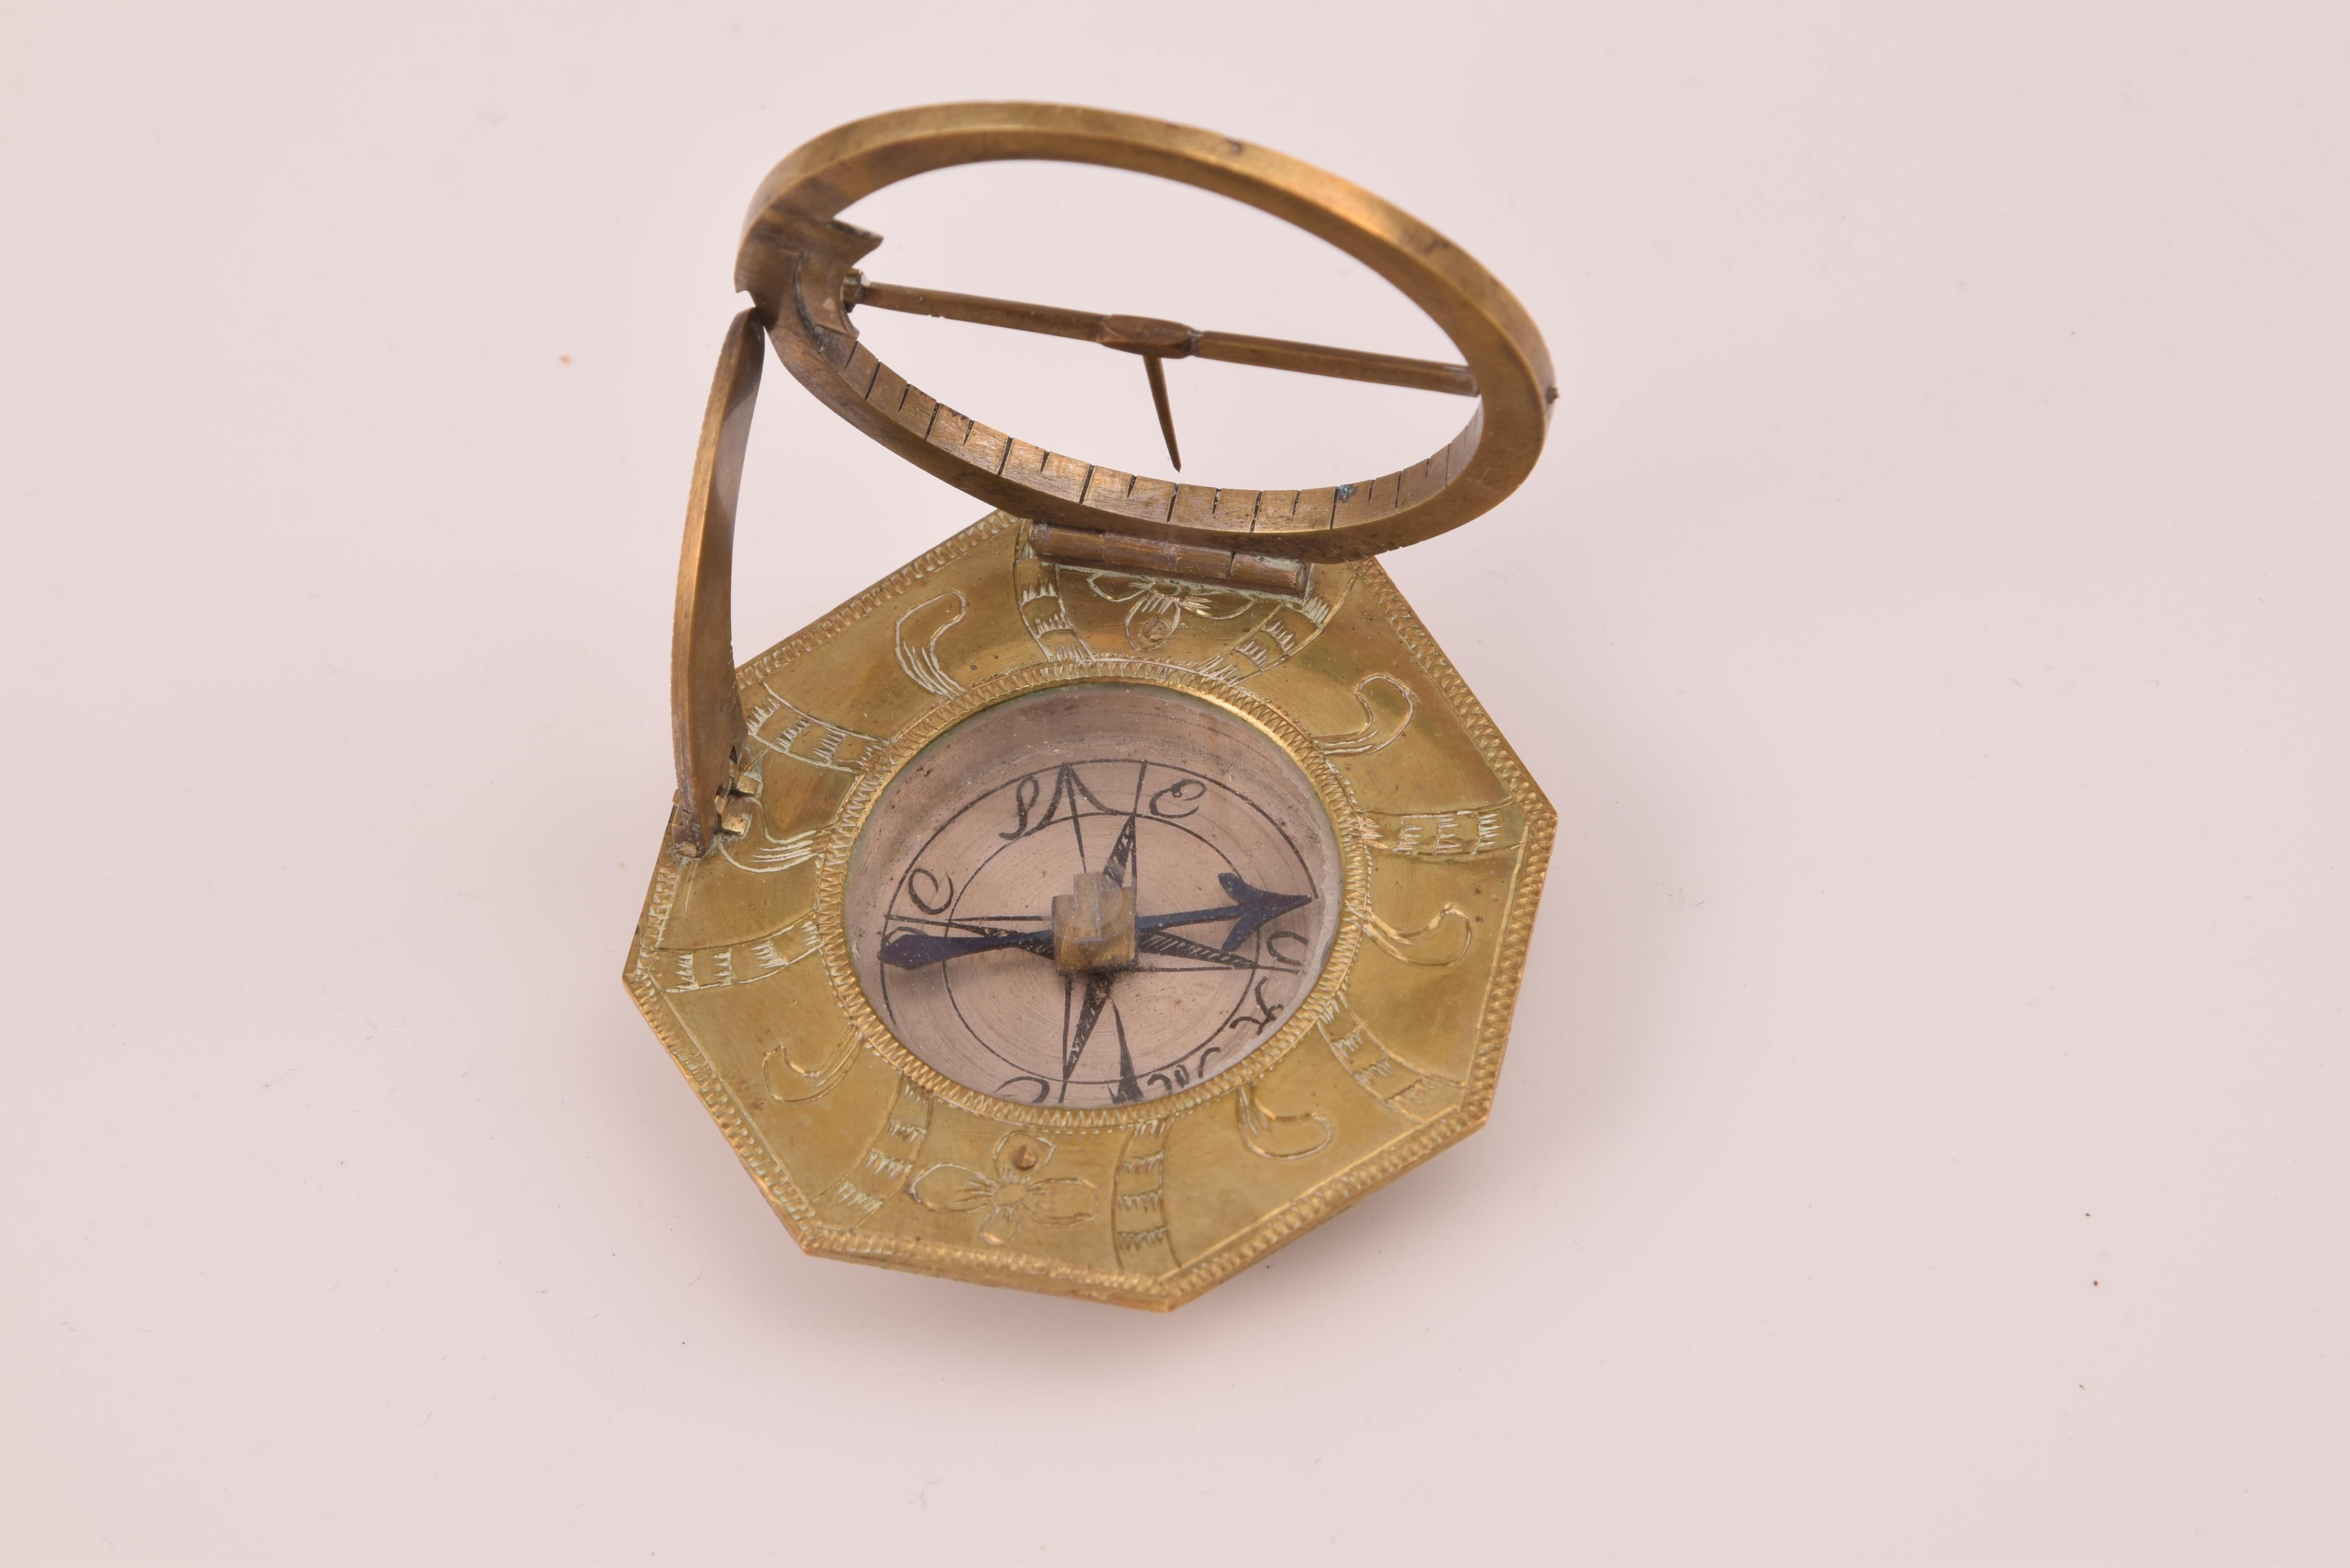 Sundial and compass with case. Bronze. SCHRETTEGGER, Johan. Augsburg, Germany, around 1800. 
Sundial with a polygonal shape made of bronze, engraved with plant elements on the front, located around the center, where a compass is presented. On the